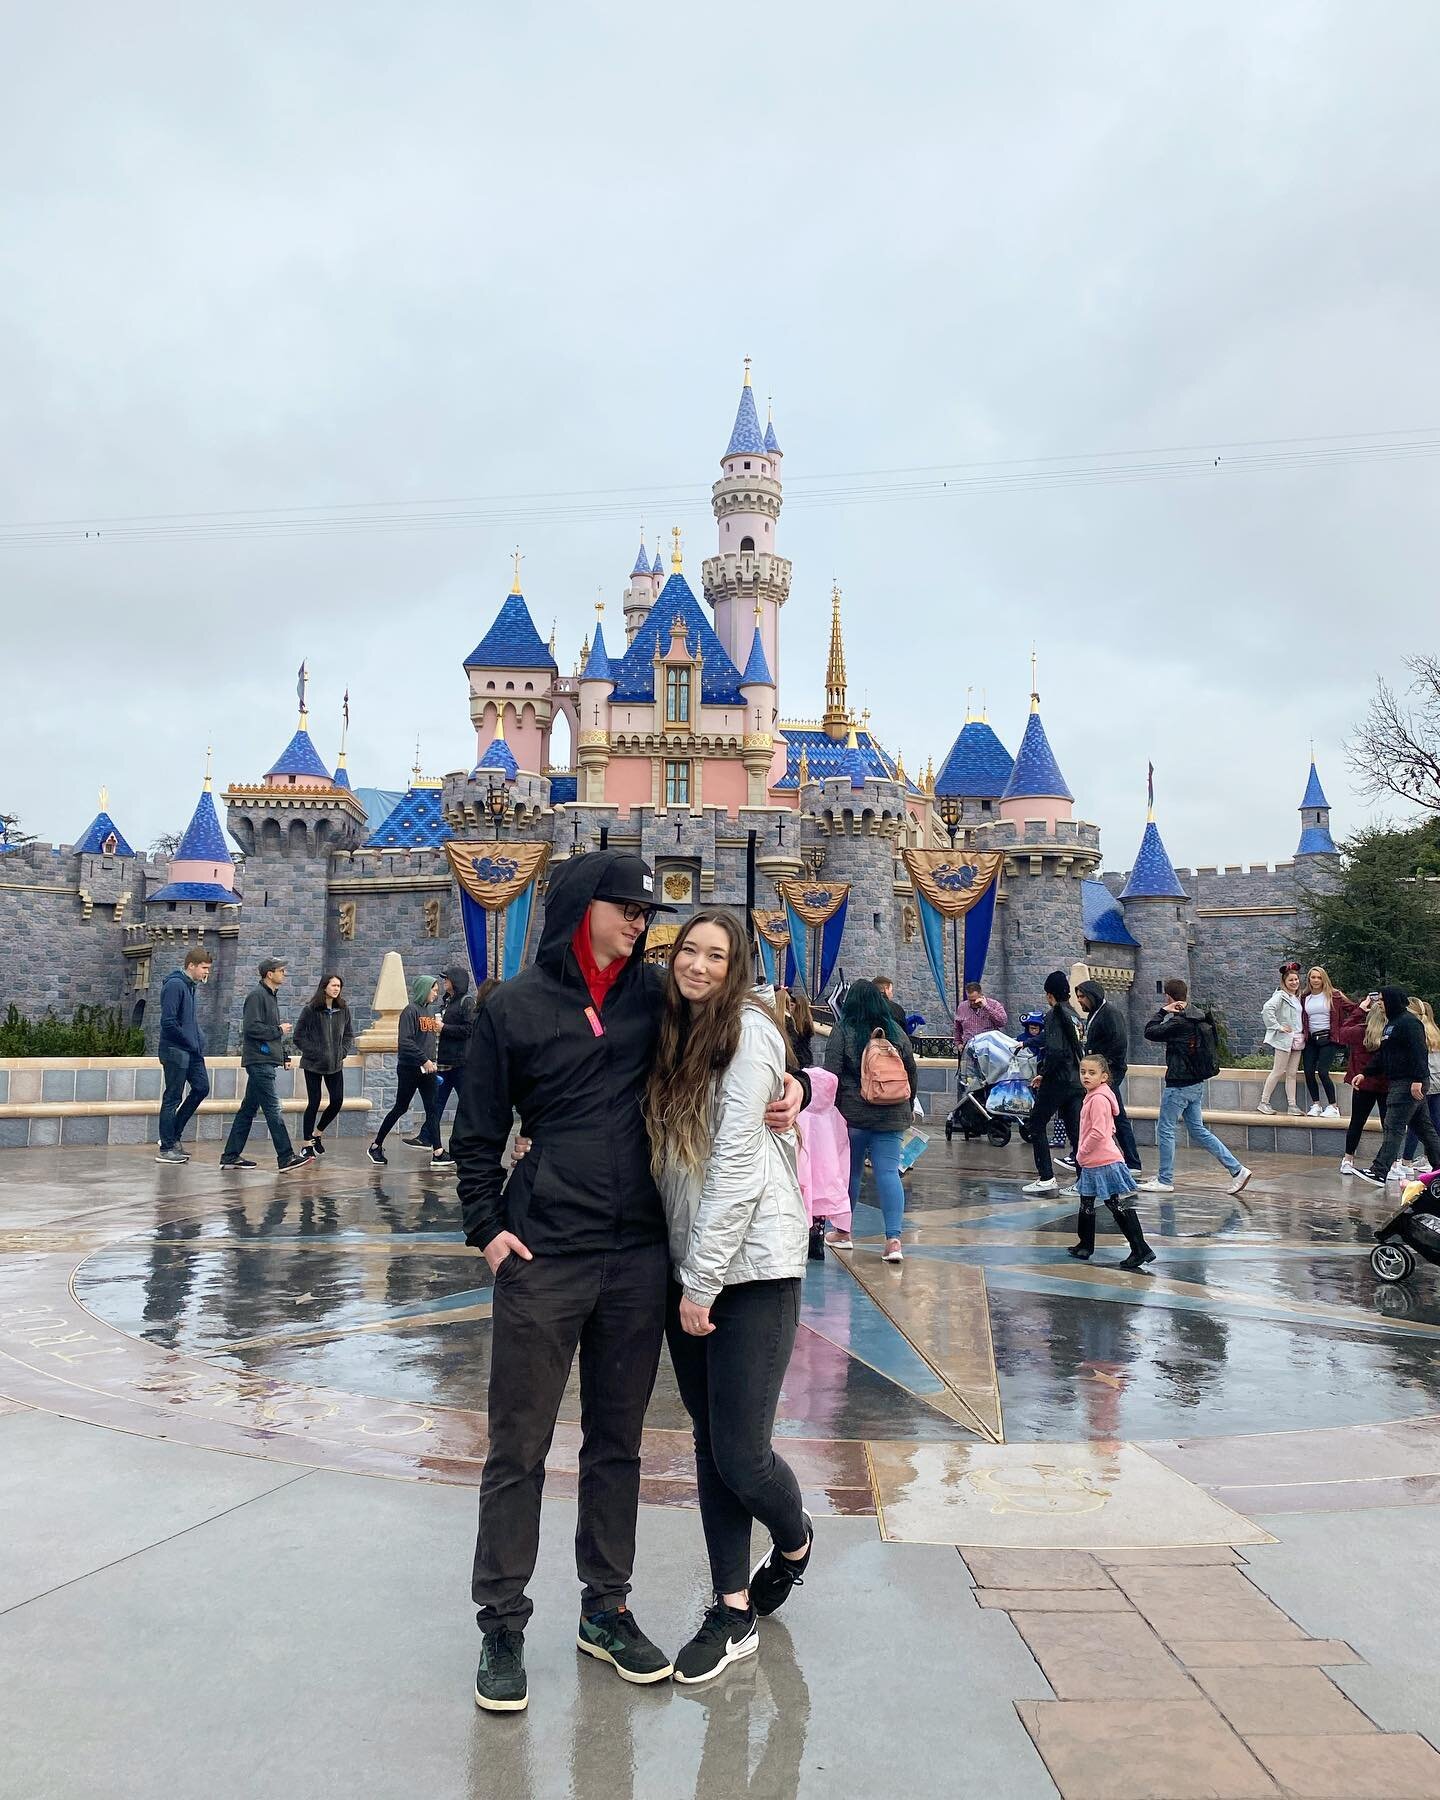 One year ago (yesterday) we were in California, having the best time ever on the very last day that @disneyland was open to everyone&mdash; no masks needed🥺We got to hug the characters and eat the food...and at the end of the night all the cast memb